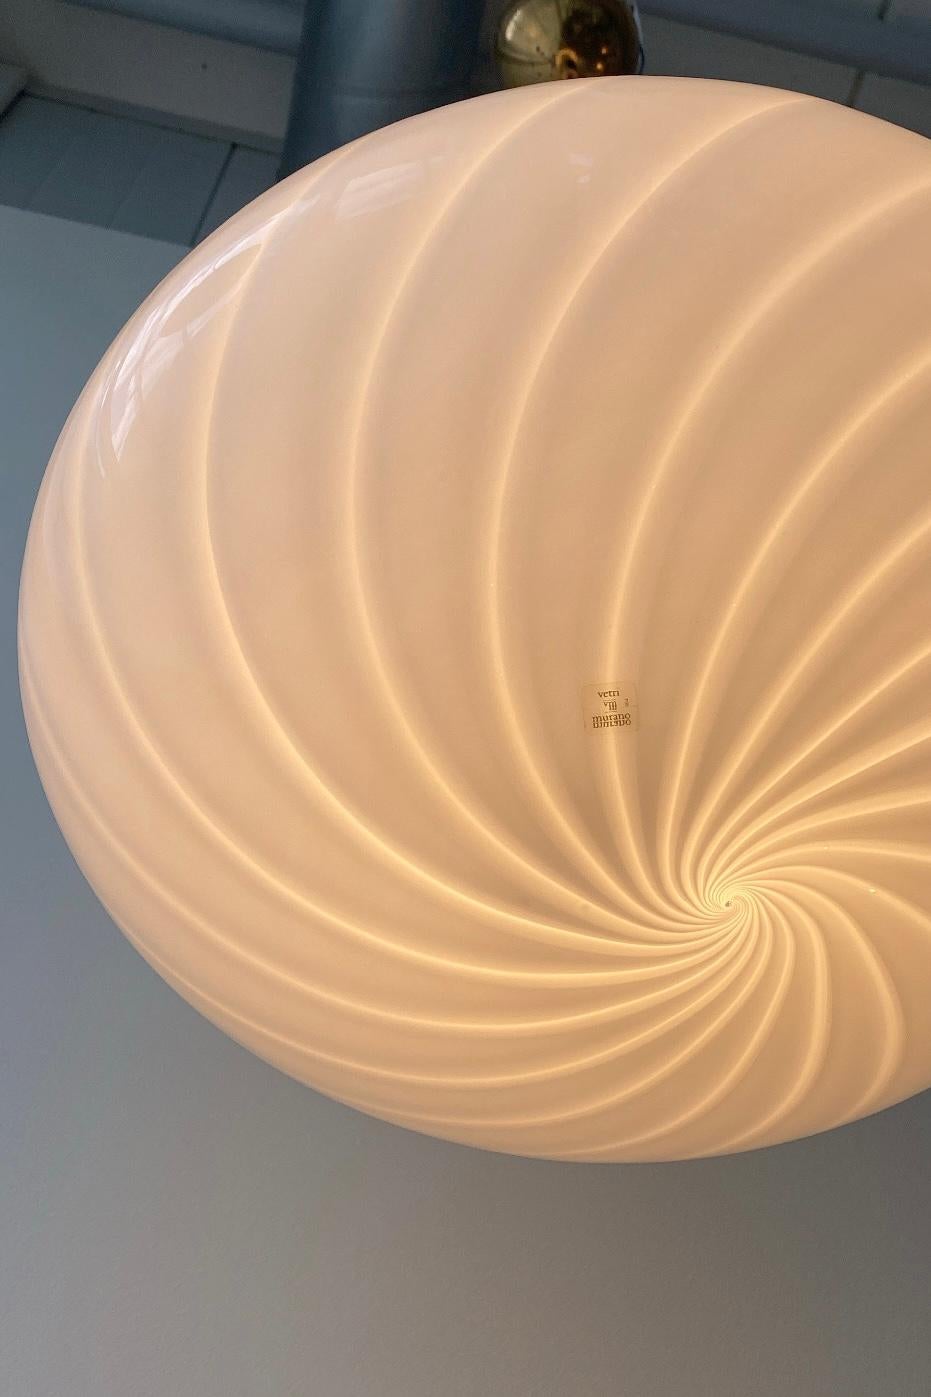 Vintage Murano Vetri pendant ceiling lamp in white glass with a fantastically beautiful swirl. Mouth-blown in an oval shape and has a brass suspension. Handmade in Italy, 1970s, and has original Murano Vetri label. D: 40 cm H: 22 cm.